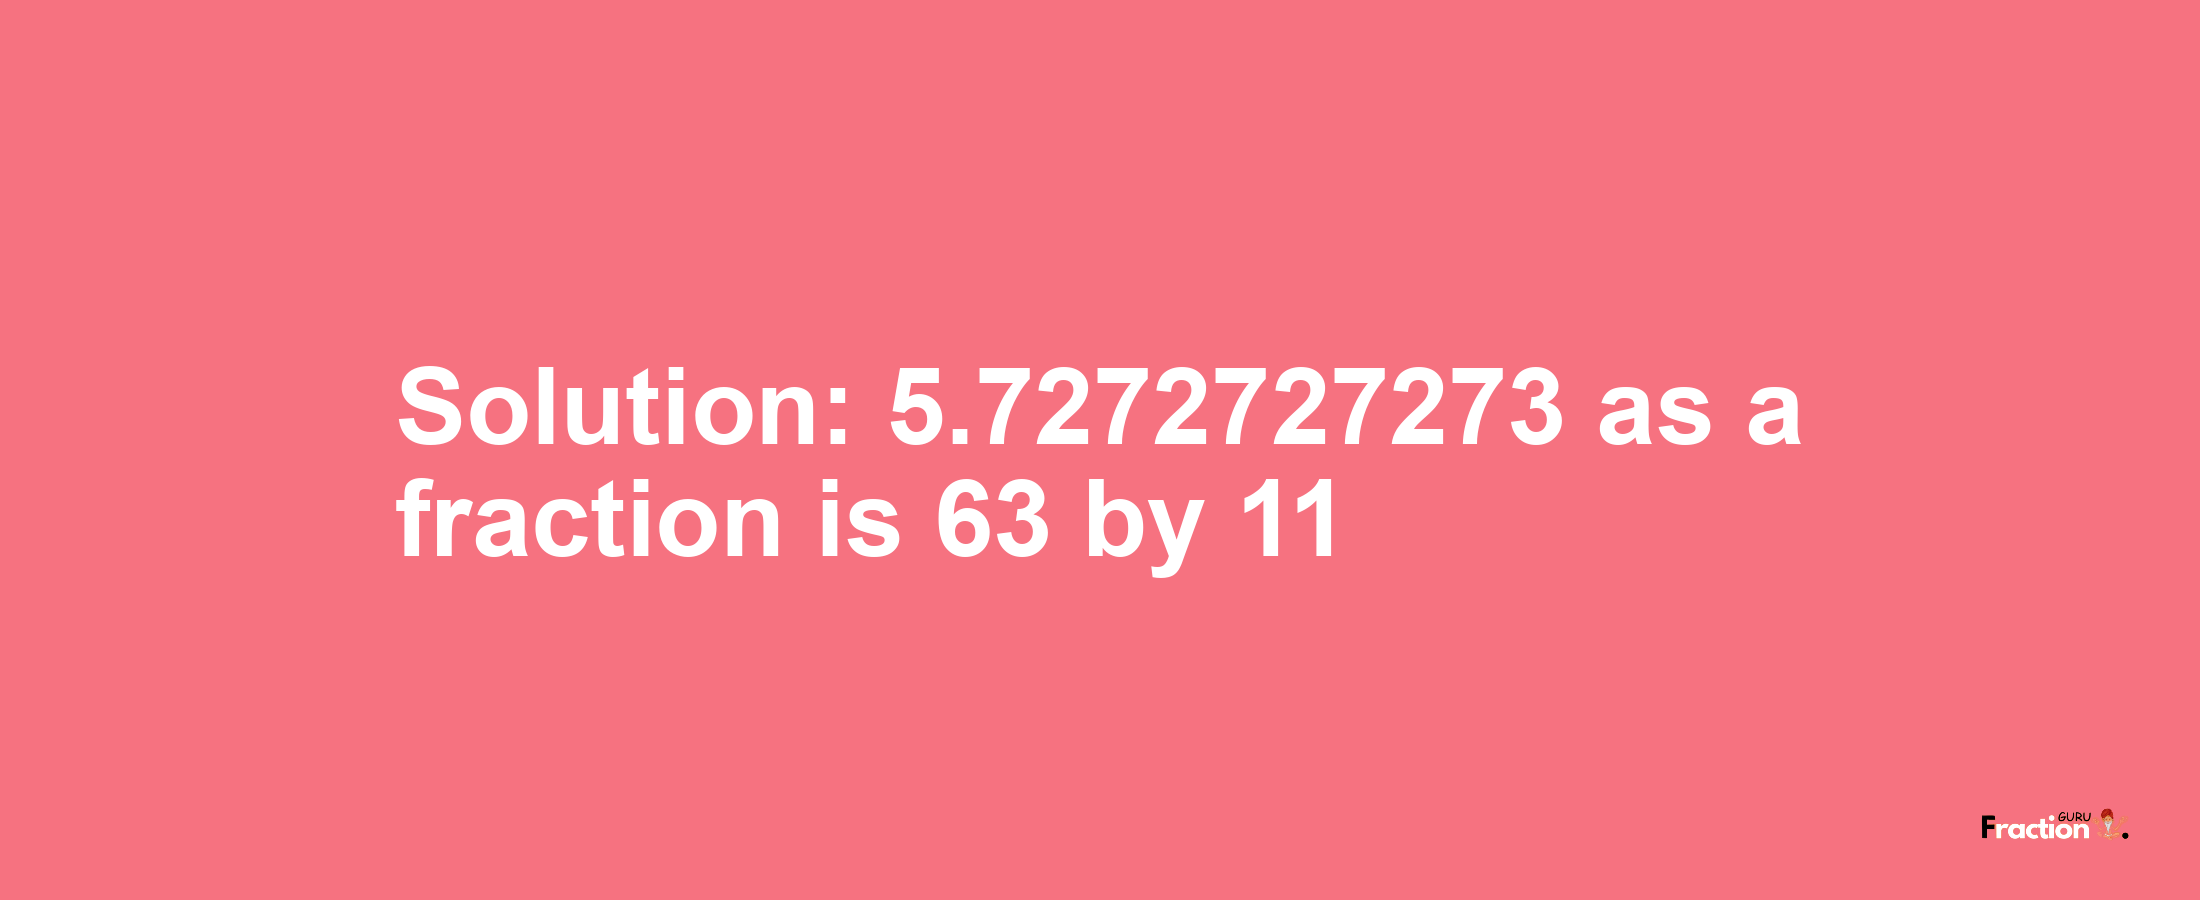 Solution:5.7272727273 as a fraction is 63/11